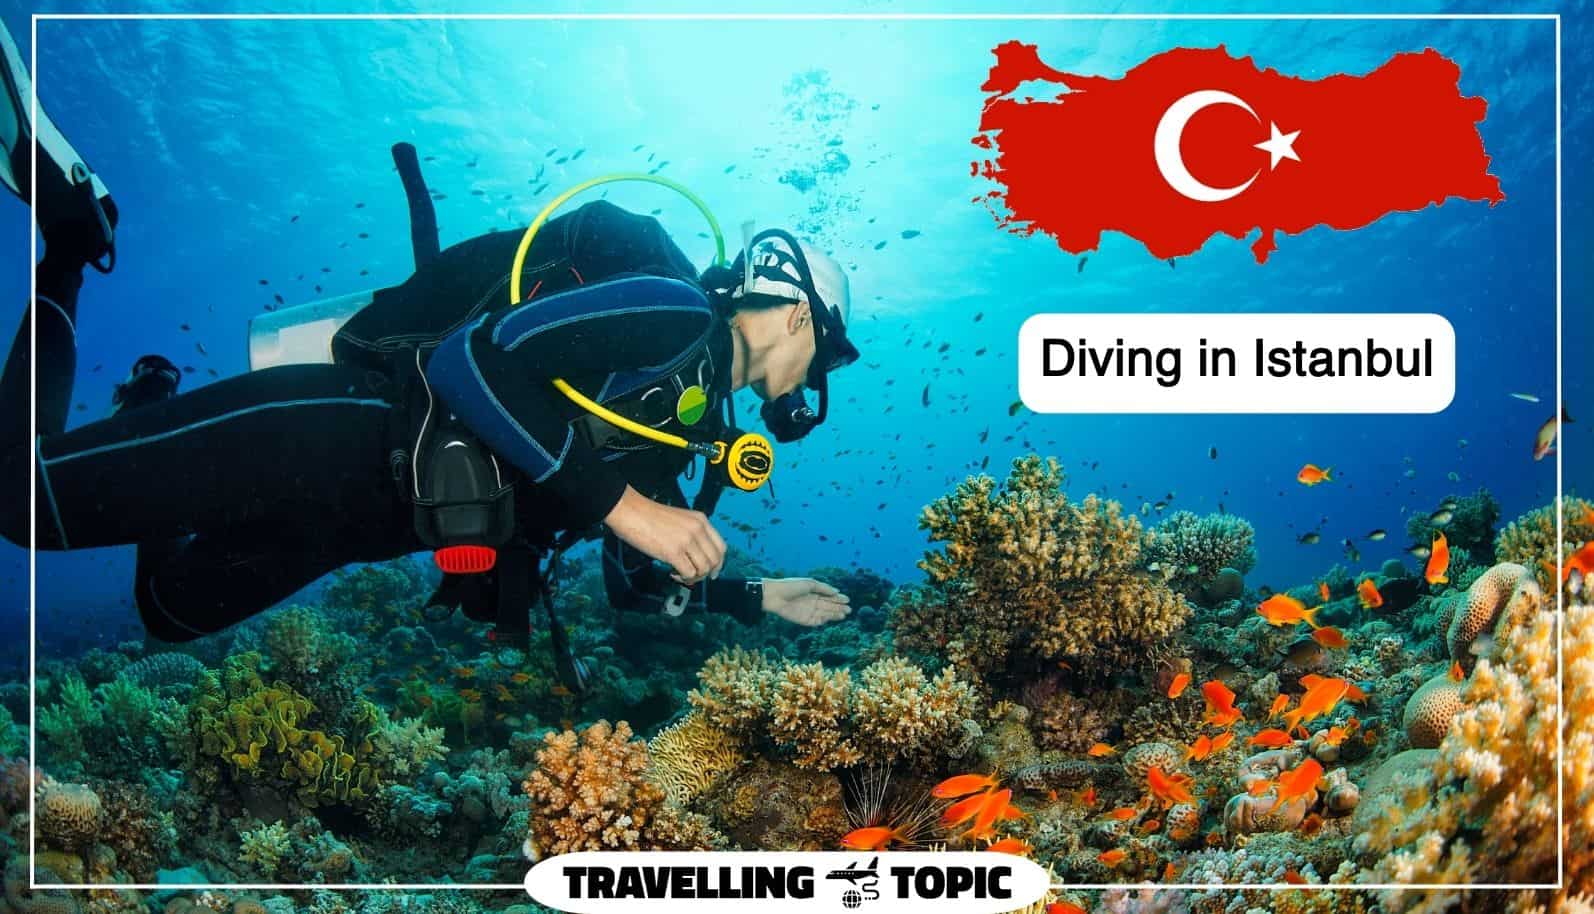 Diving in Istanbul